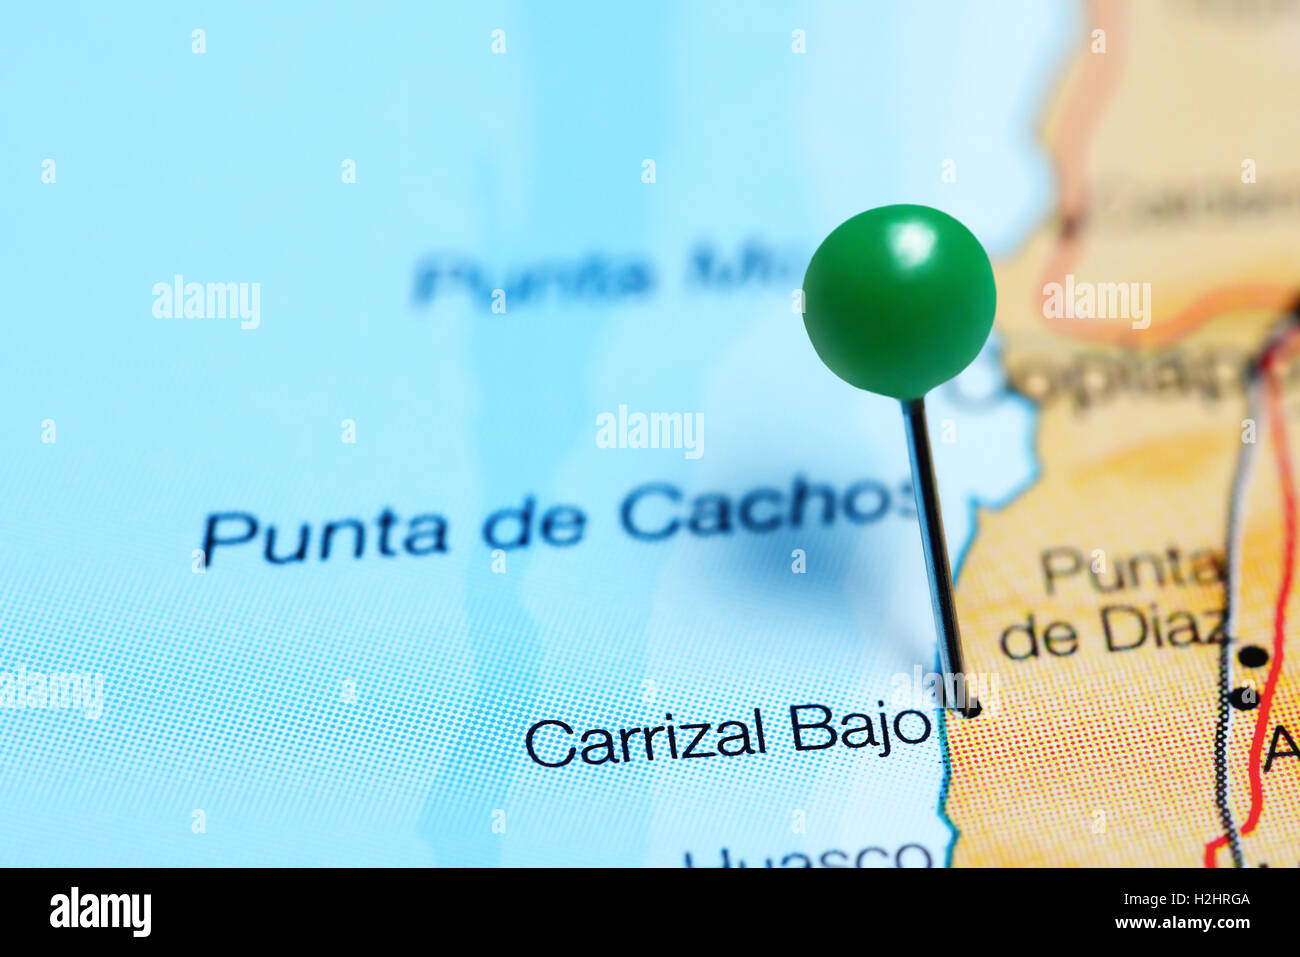 Carrizal Bajo pinned on a map of Chile Stock Photo